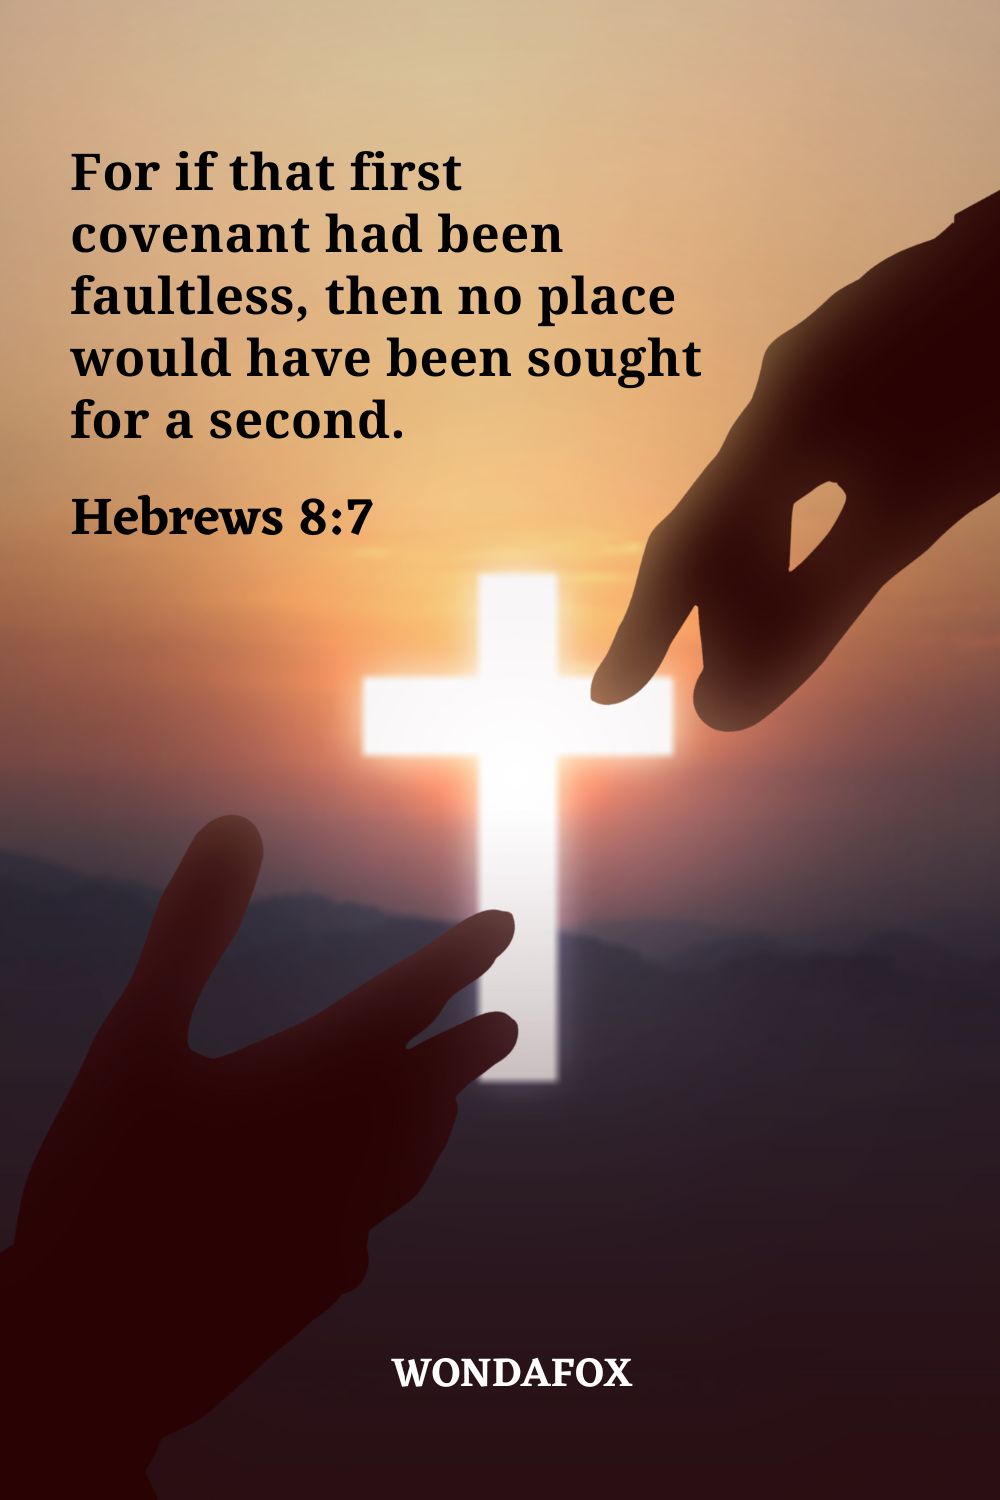 For if that first covenant had been faultless, then no place would have been sought for a second.
Hebrews 8:7